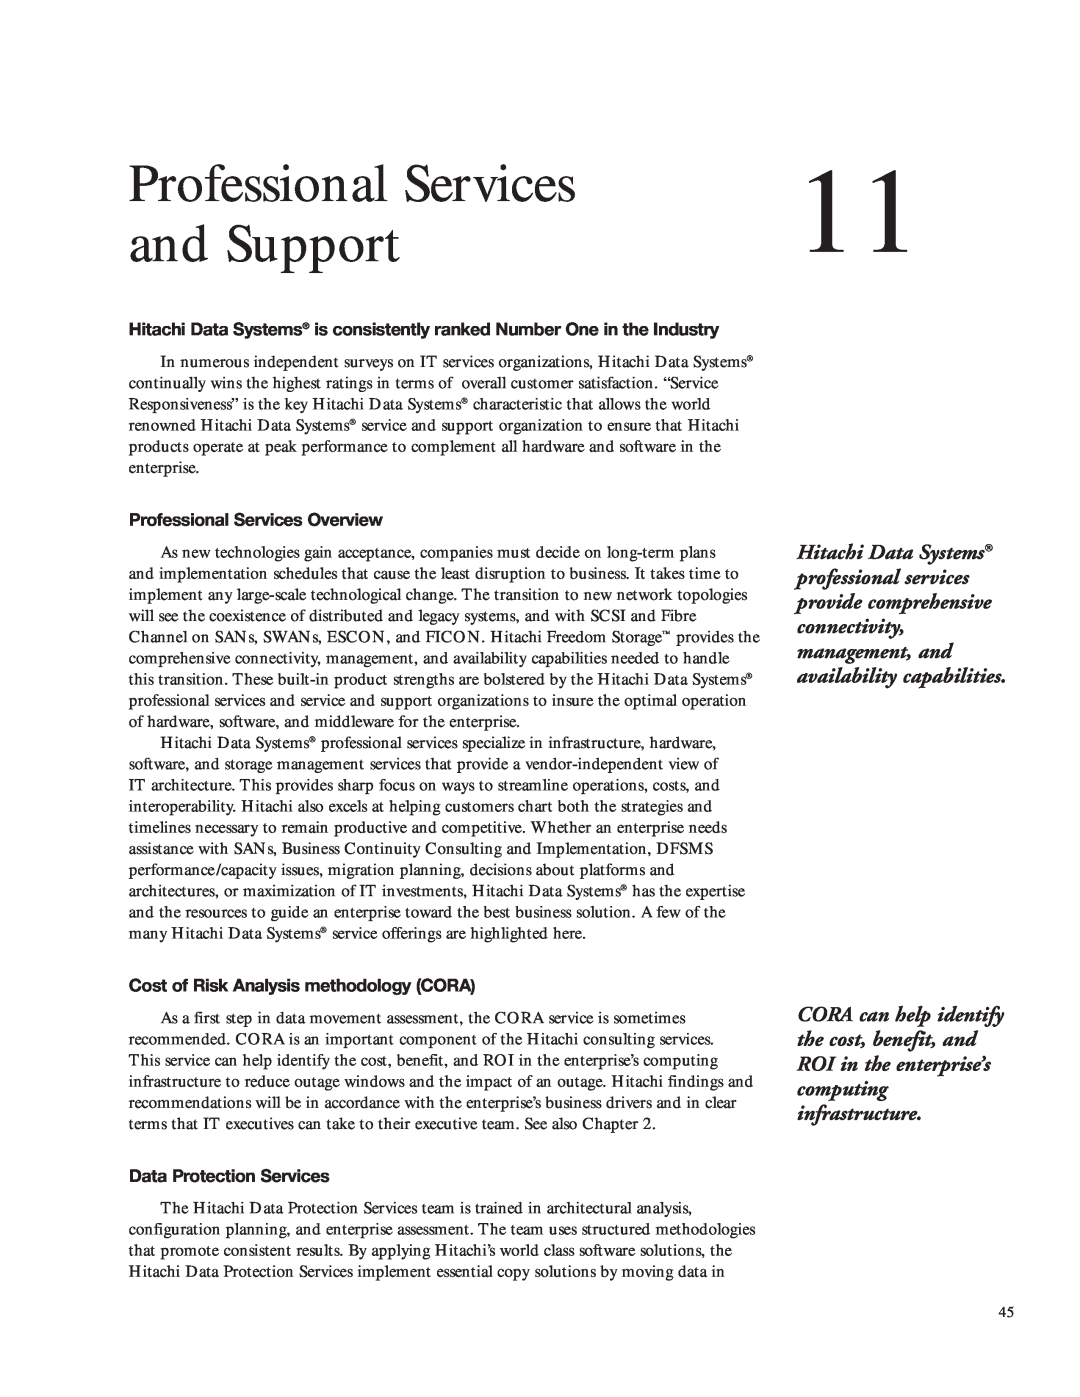 Hitachi 9960 Professional Services and Support, Professional Services Overview, Cost of Risk Analysis methodology CORA 